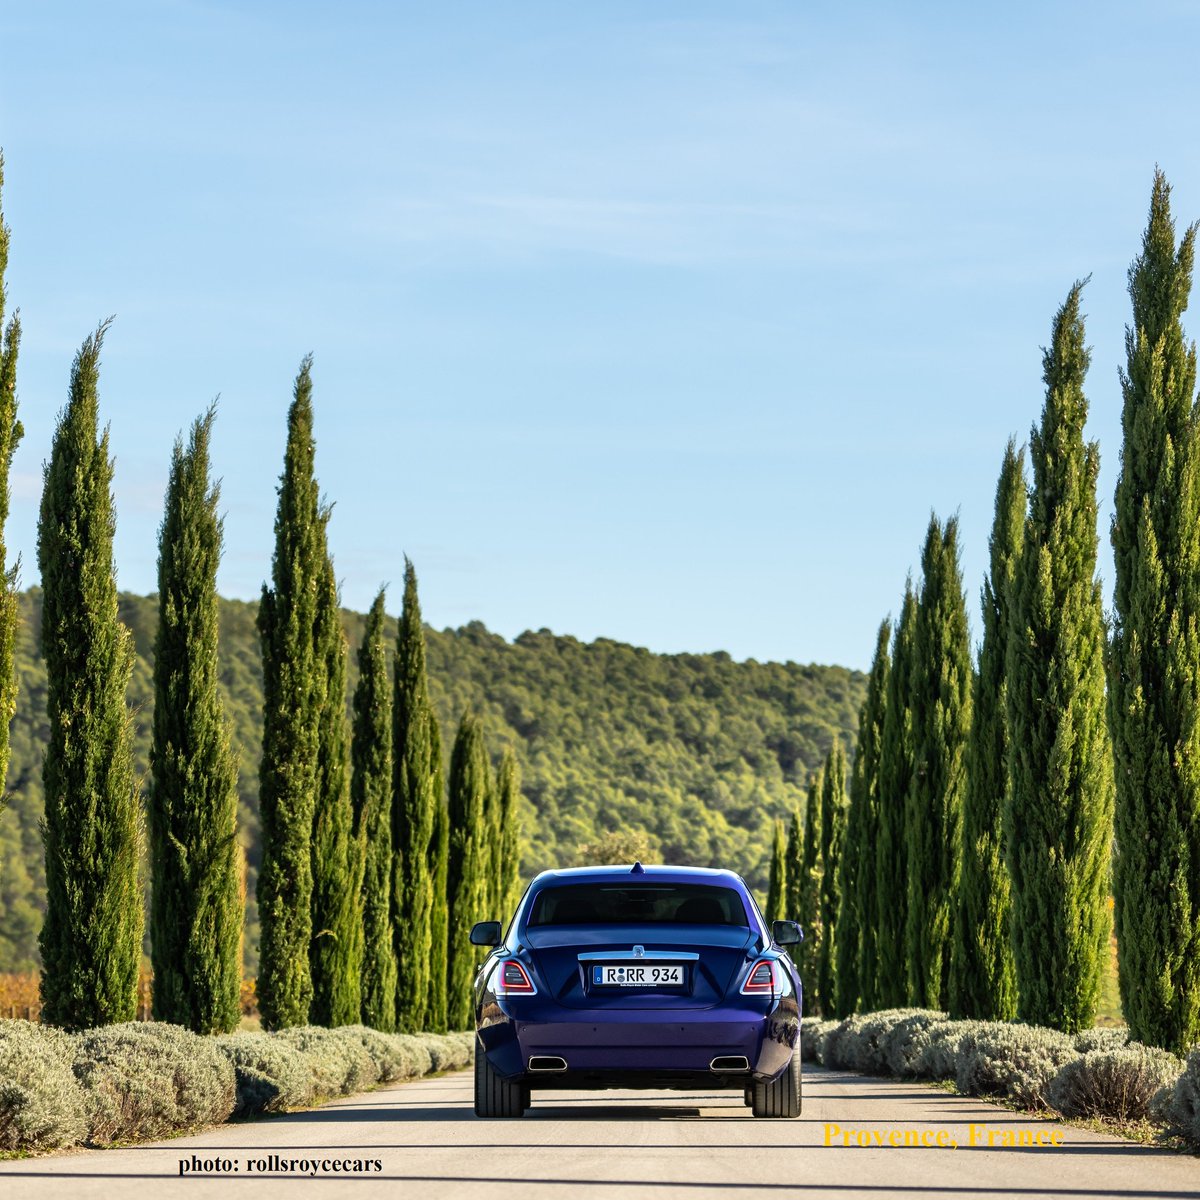 The beauty of Tucana Purple attracts attention and stands out against the natural scenery of Provence - France

#BespokeIsRollsRoyce